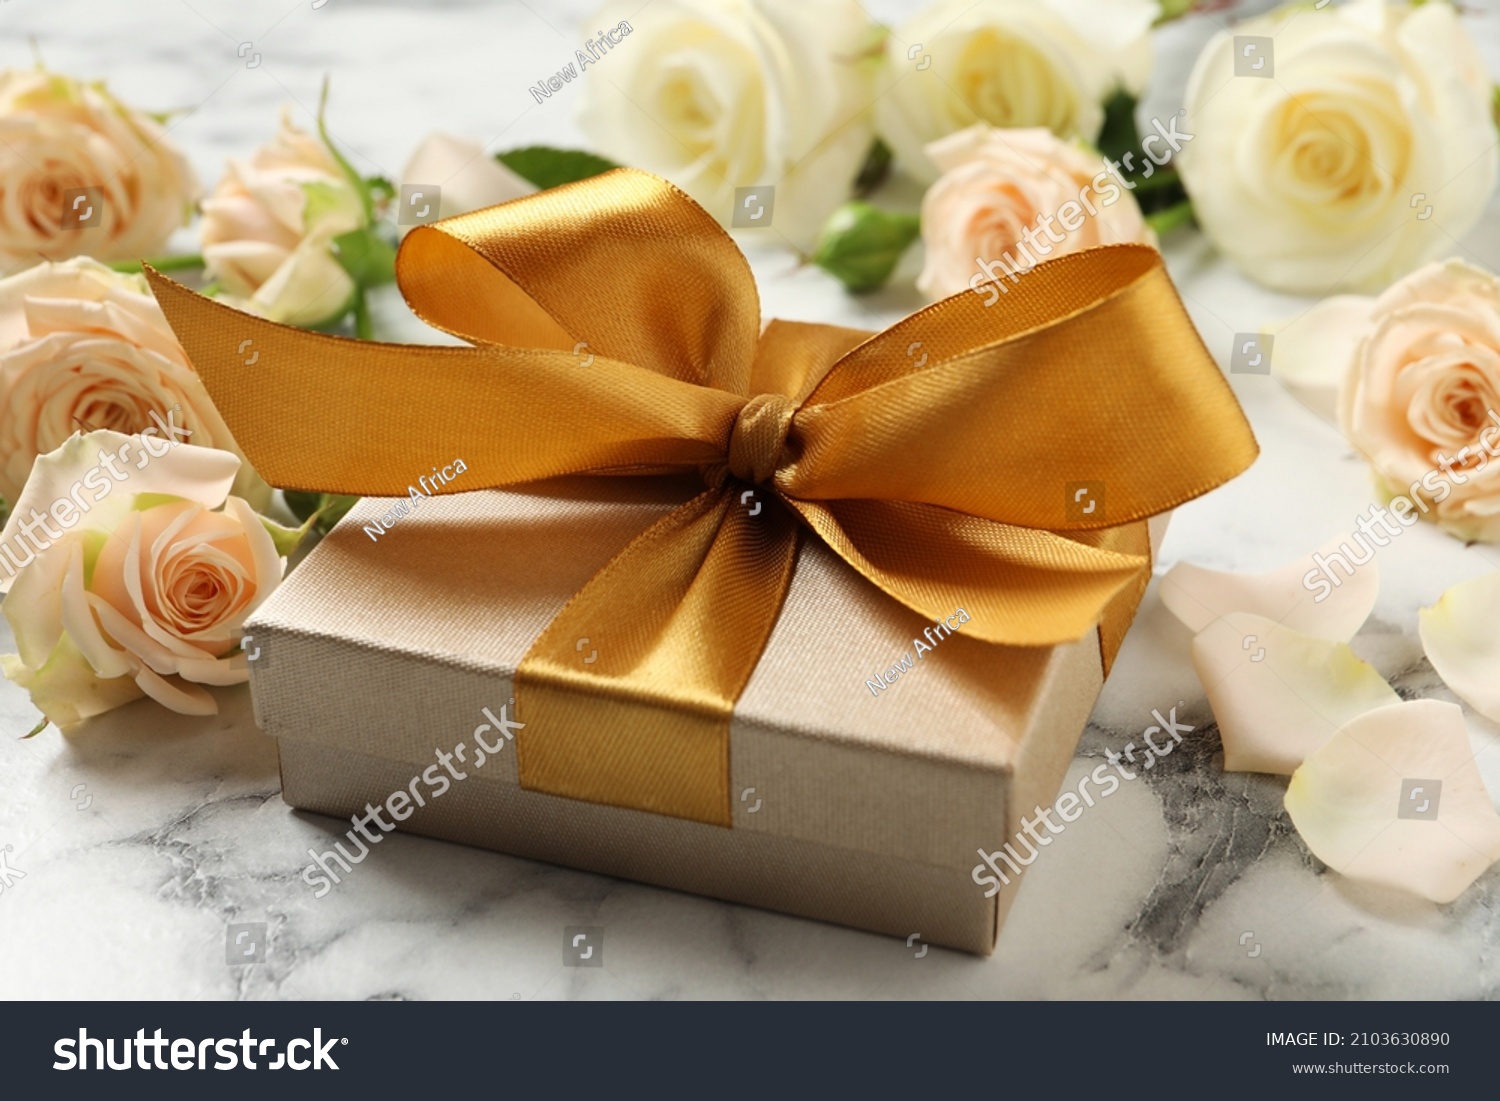 Golden gift box and beautiful roses on white marble table #2103630890